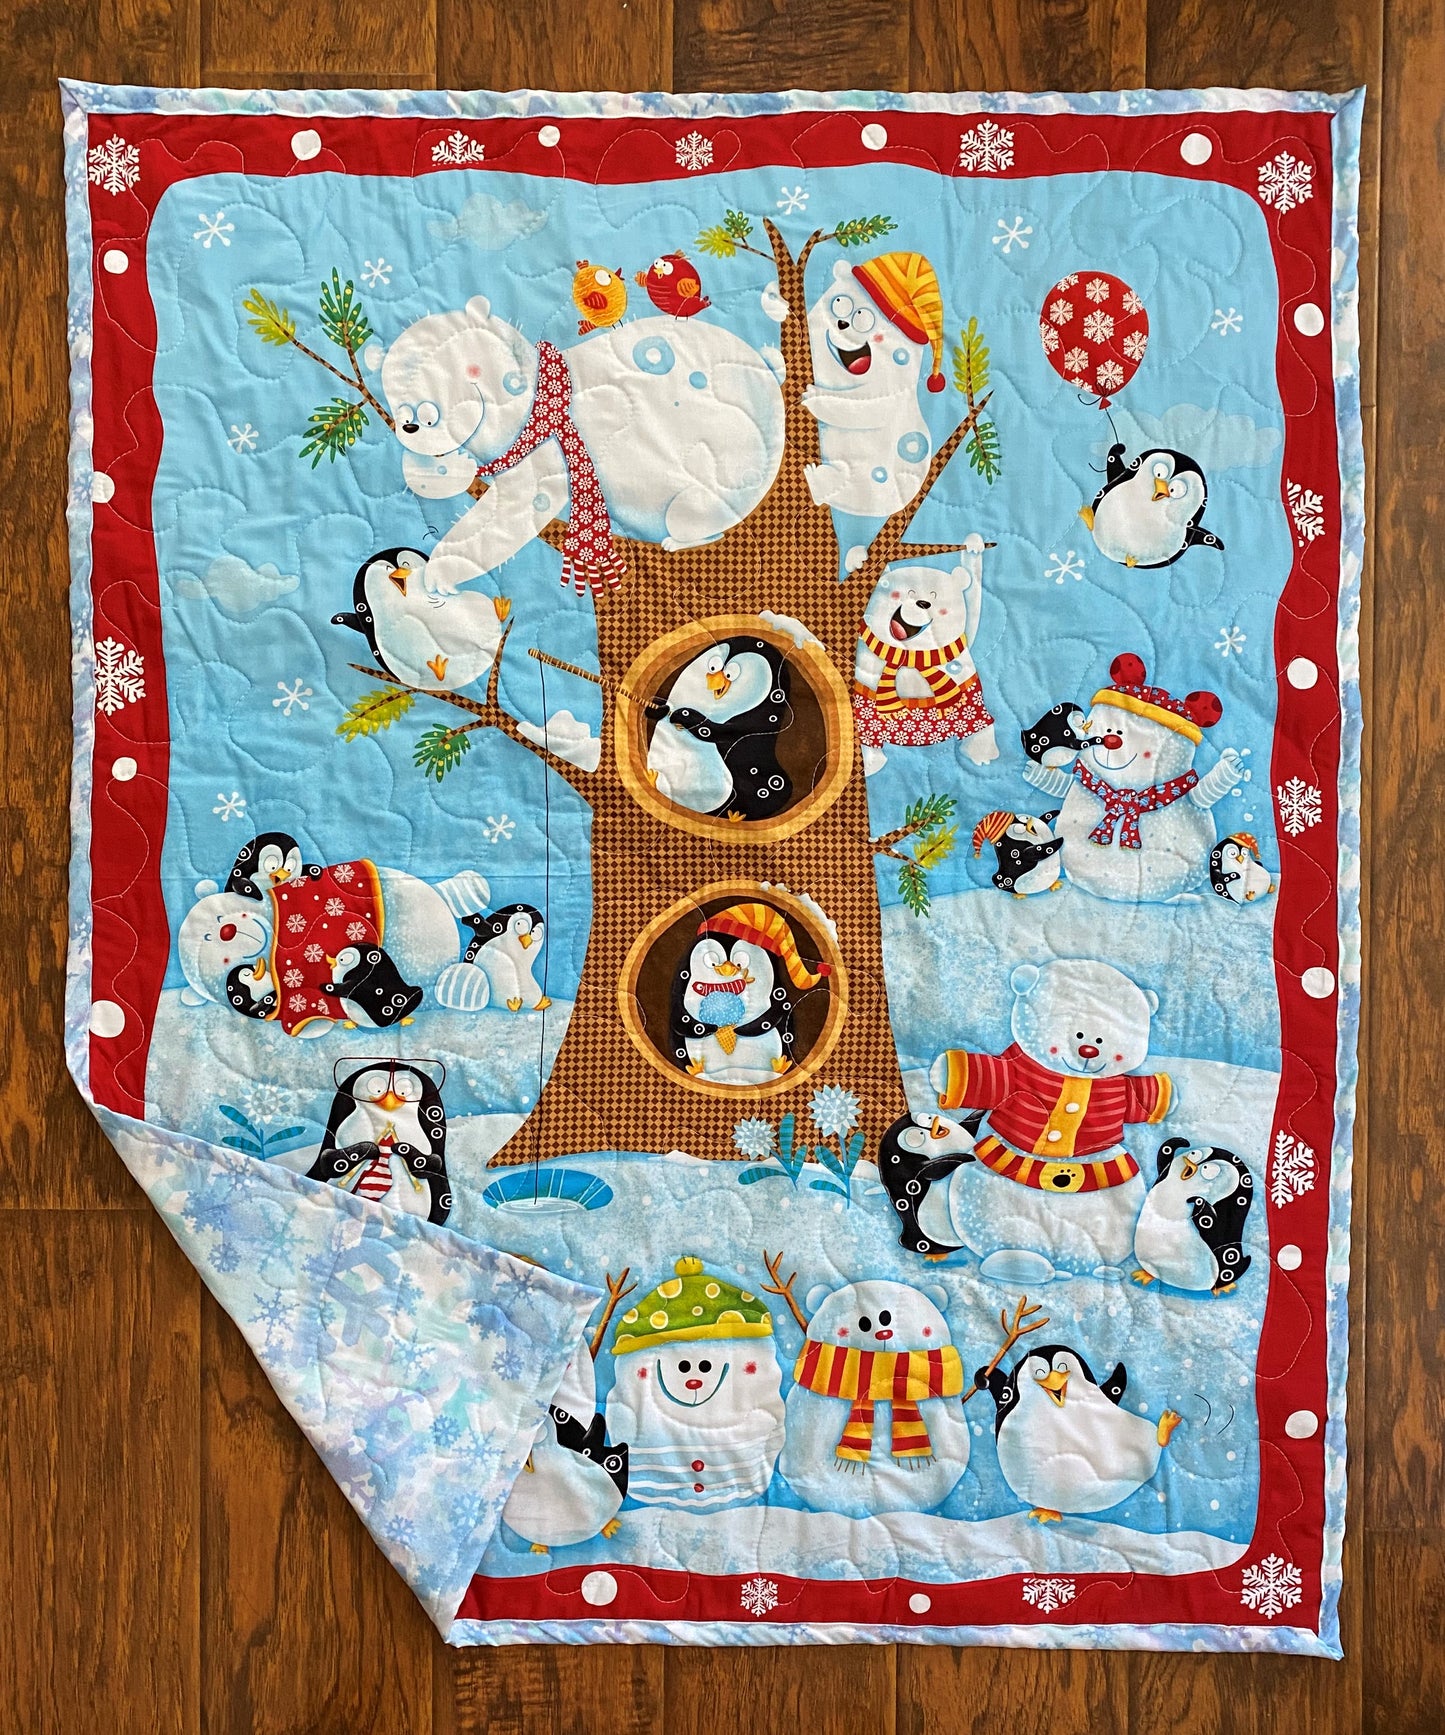 Winter Nature Snow Fun Baby Child Quilted Blanket Polar Bear, Penguins, Snowman Snowflakes Baby Nursery Gender Neutral Bedding